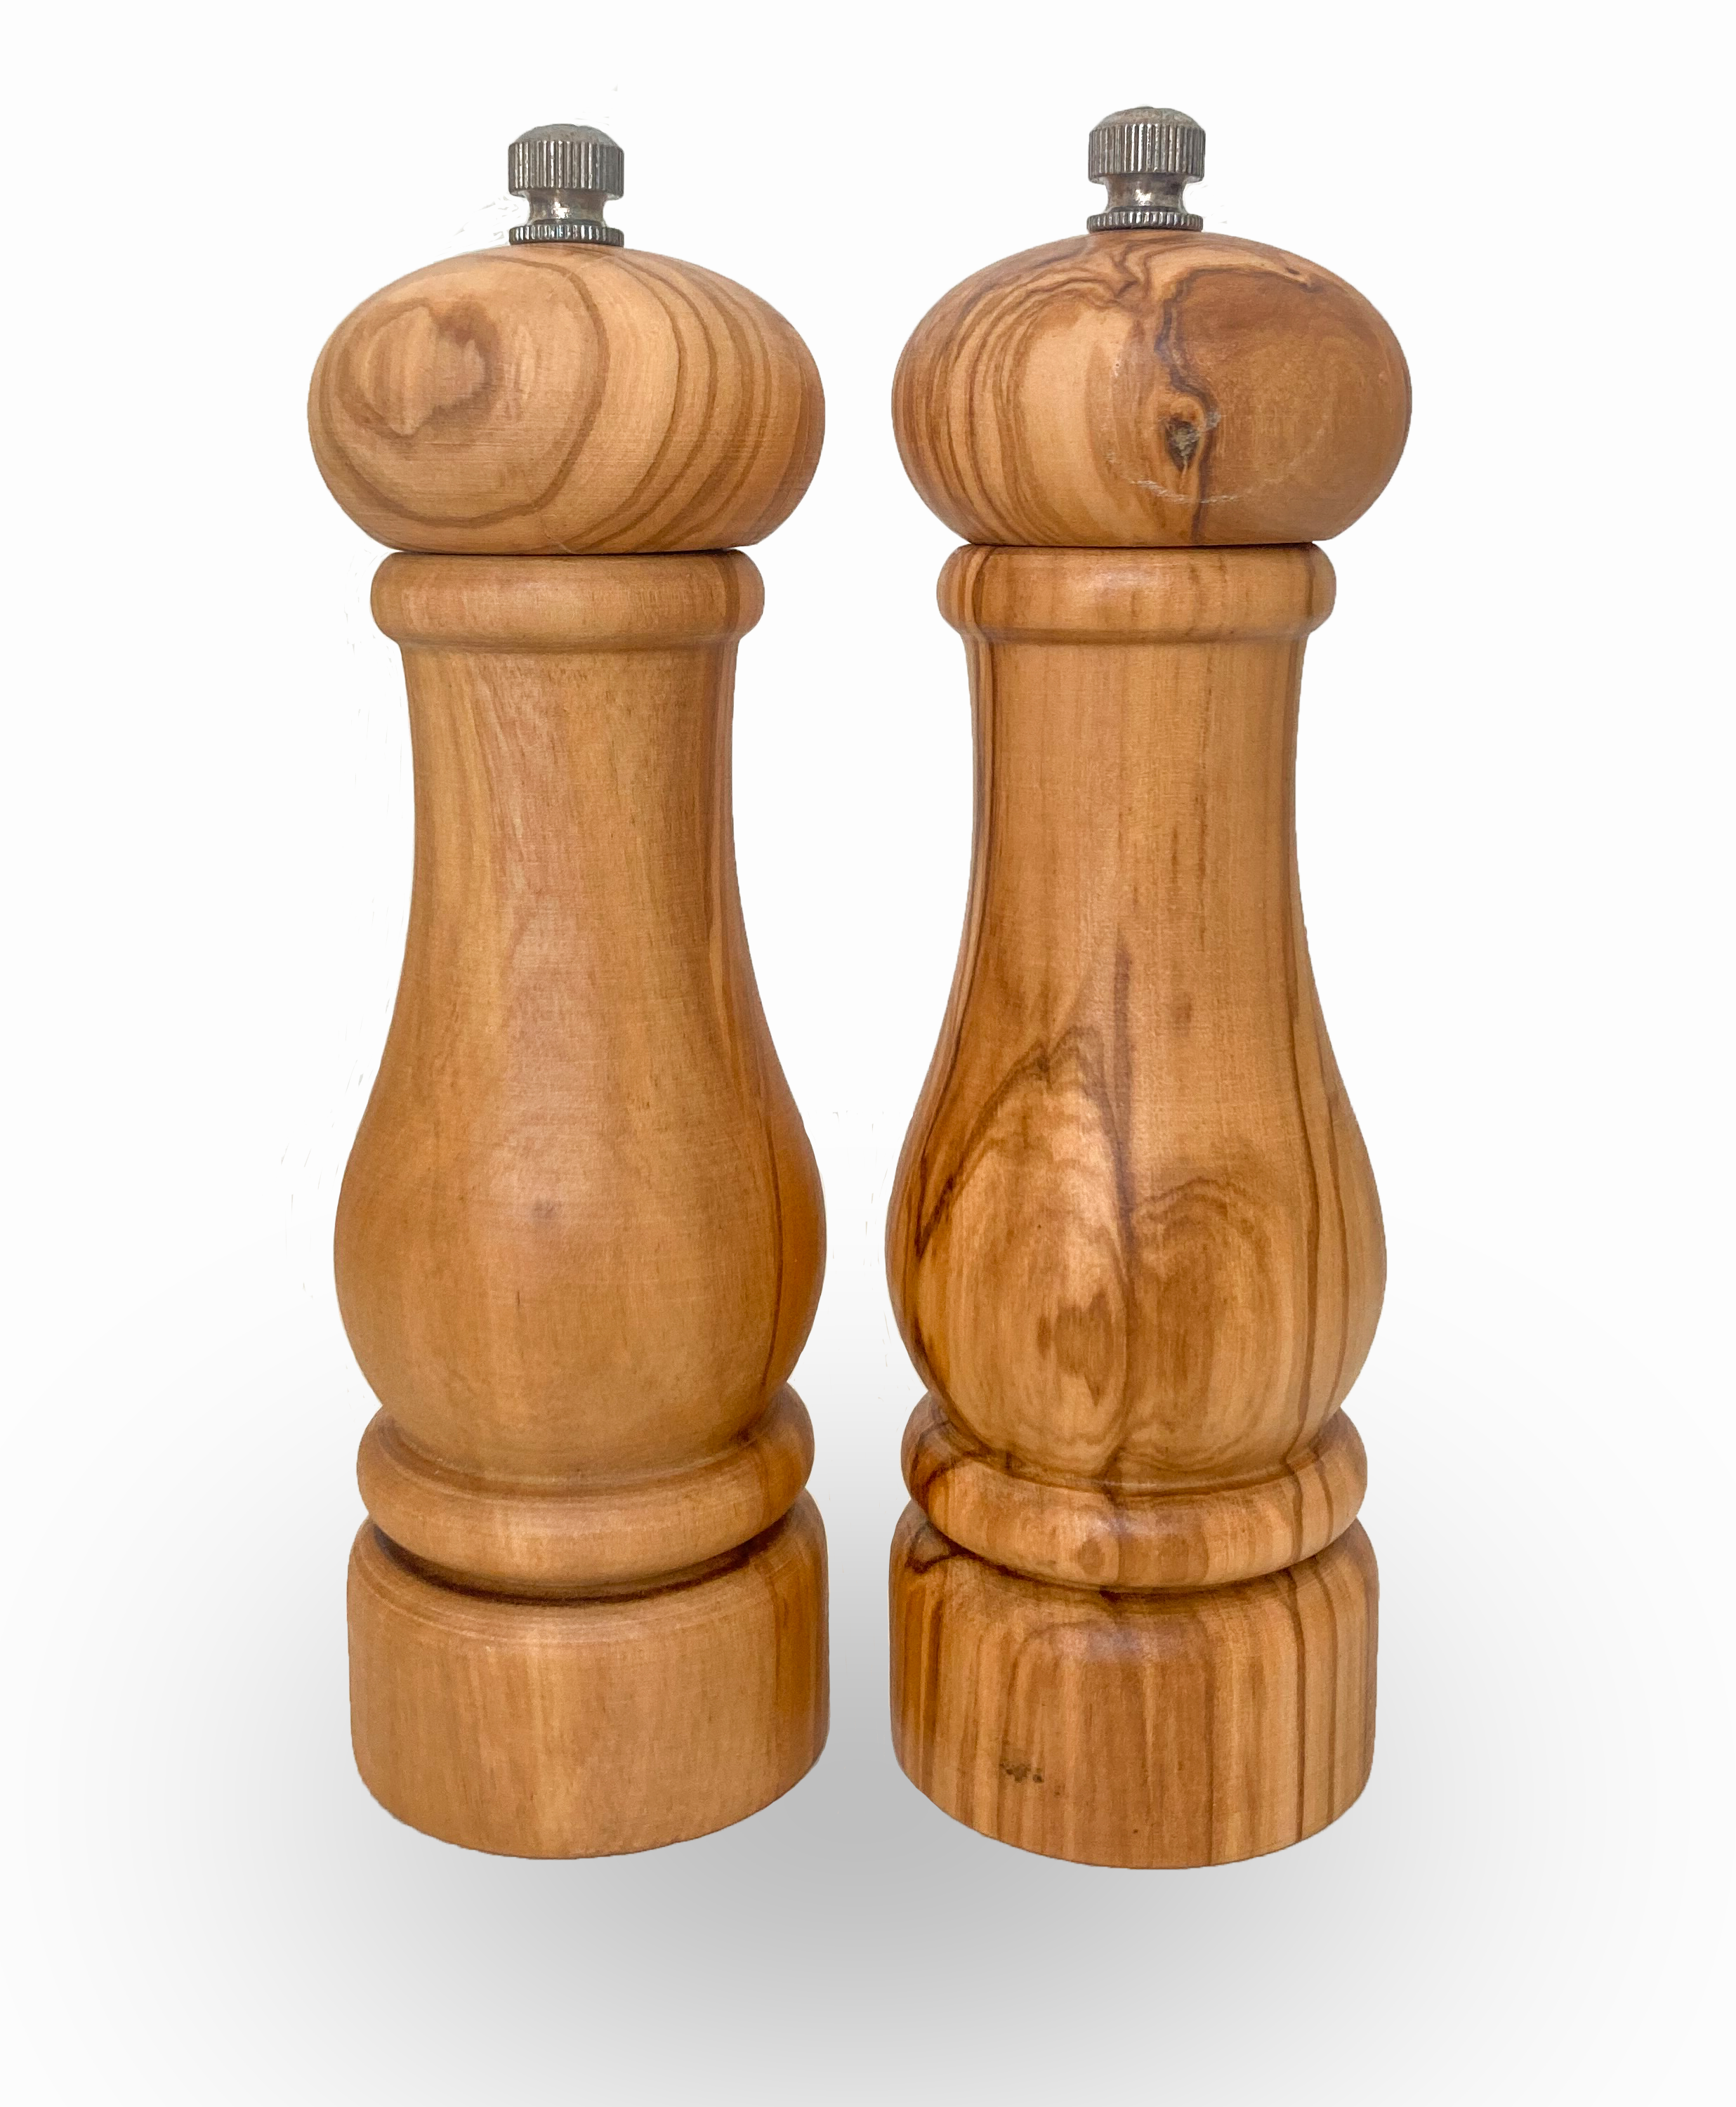 Olive Wood Pepper Mill 6.5 – The Olive of Morganton